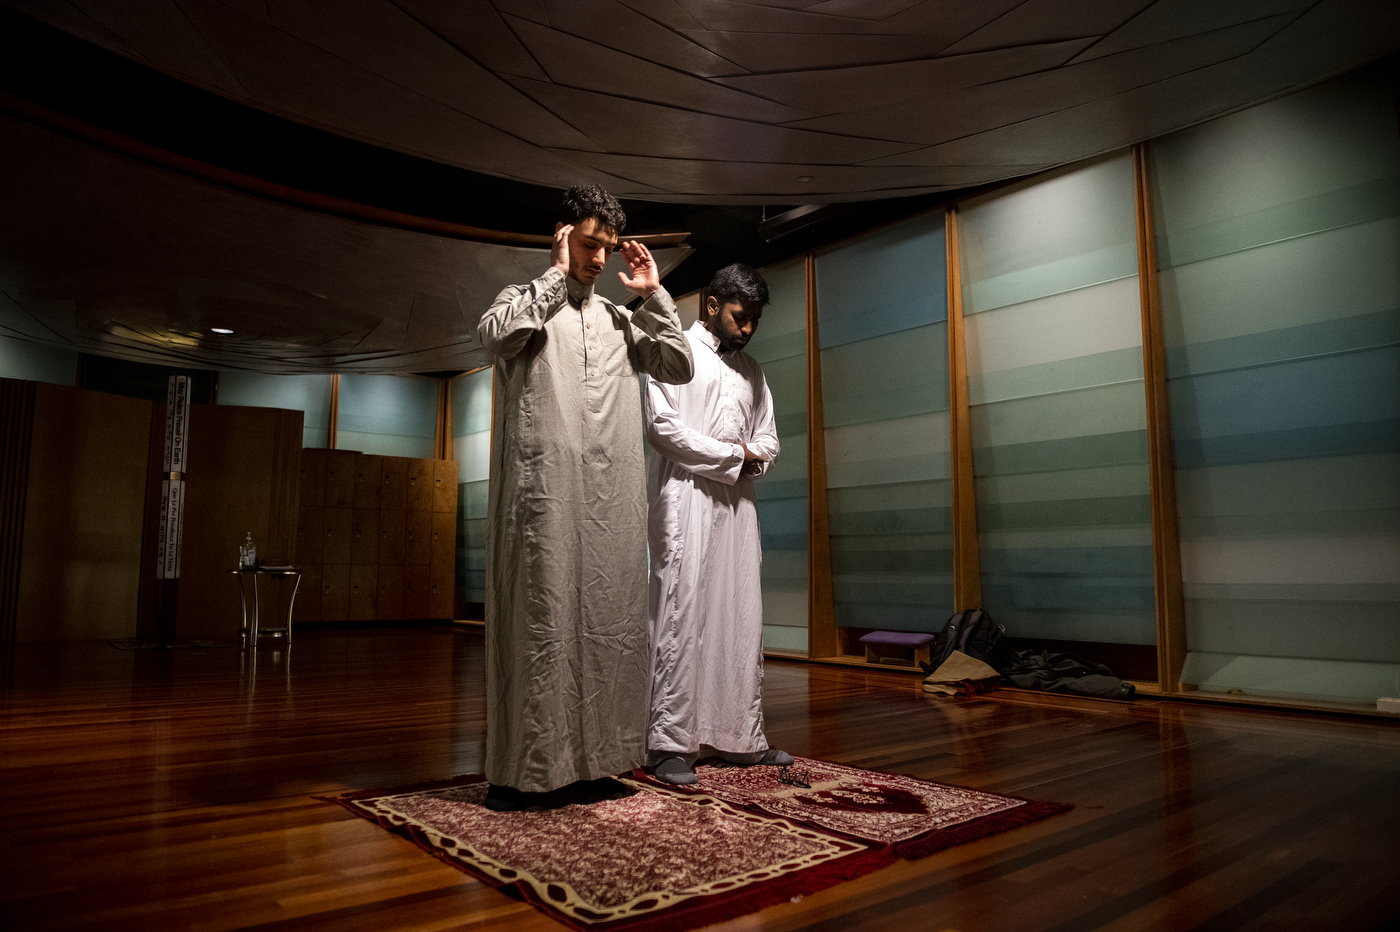 Northeastern students Omar Shoura and Shoyaib Shaik pray in the Sacred Space in Ell Hall